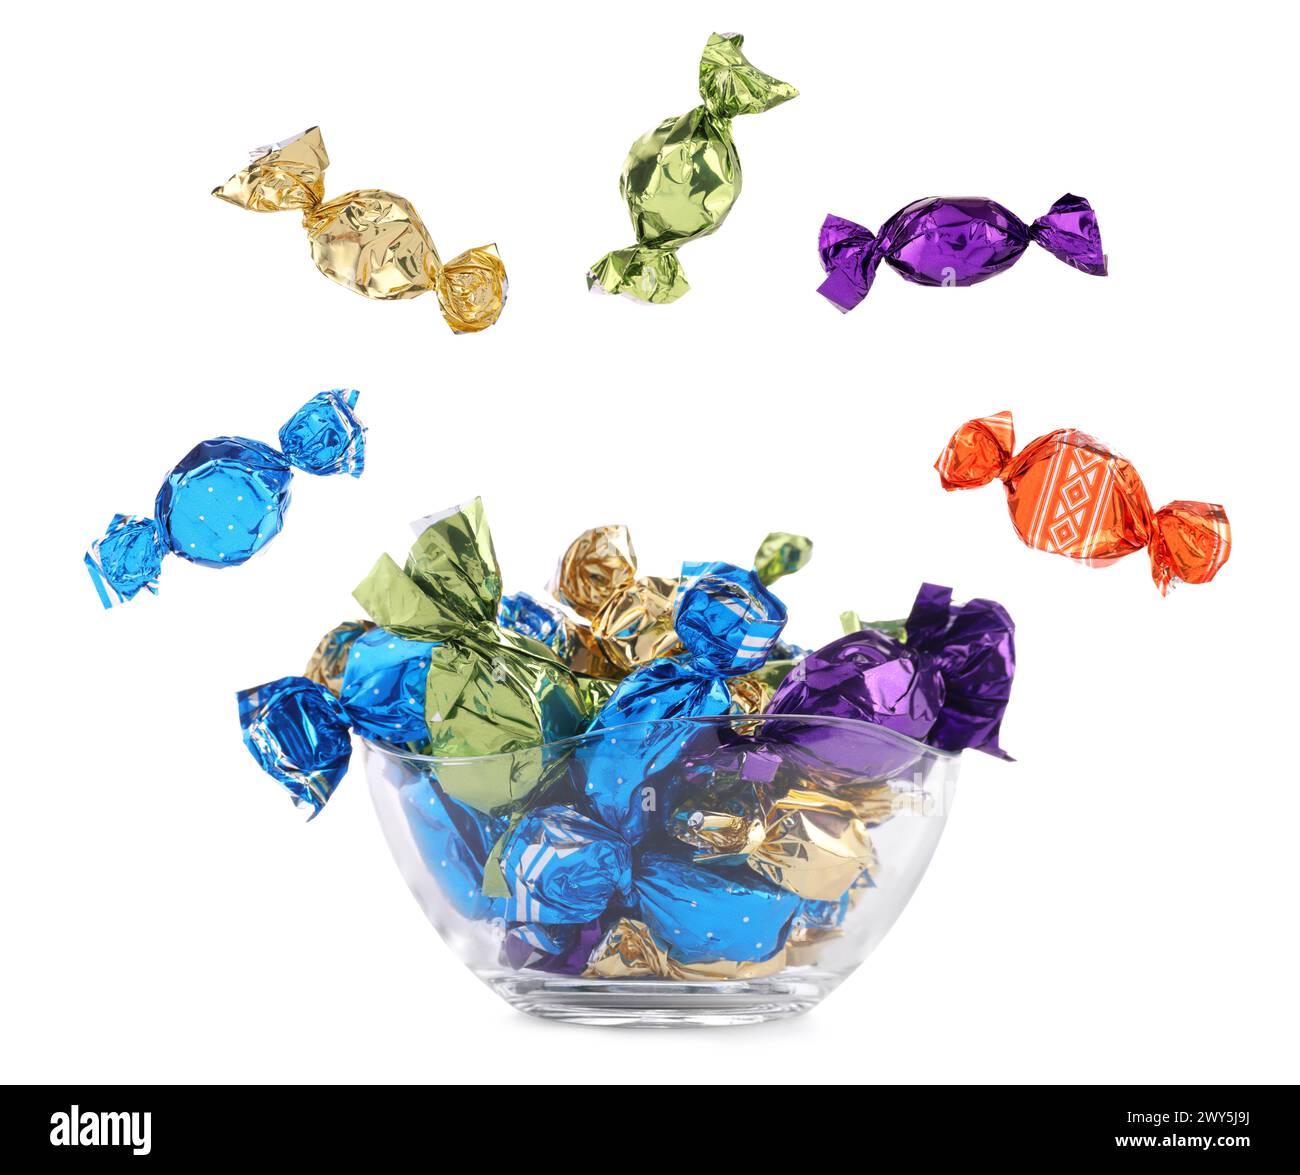 Candies in bright wrappers falling over bowl on white background Stock Photo